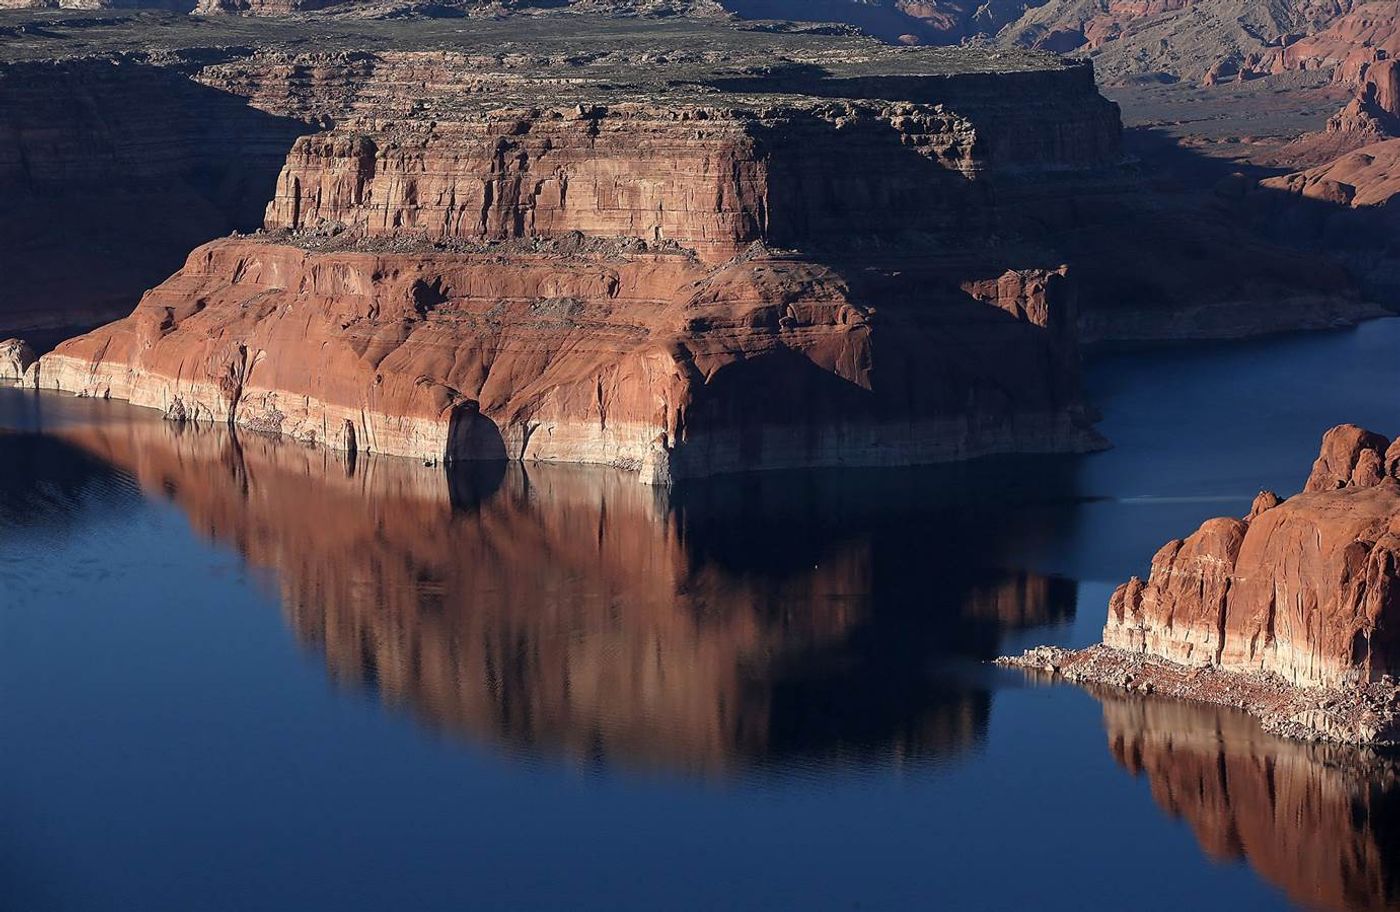 Lake Powell, currently the largest  reservoir in the United States is far below its normal water level.